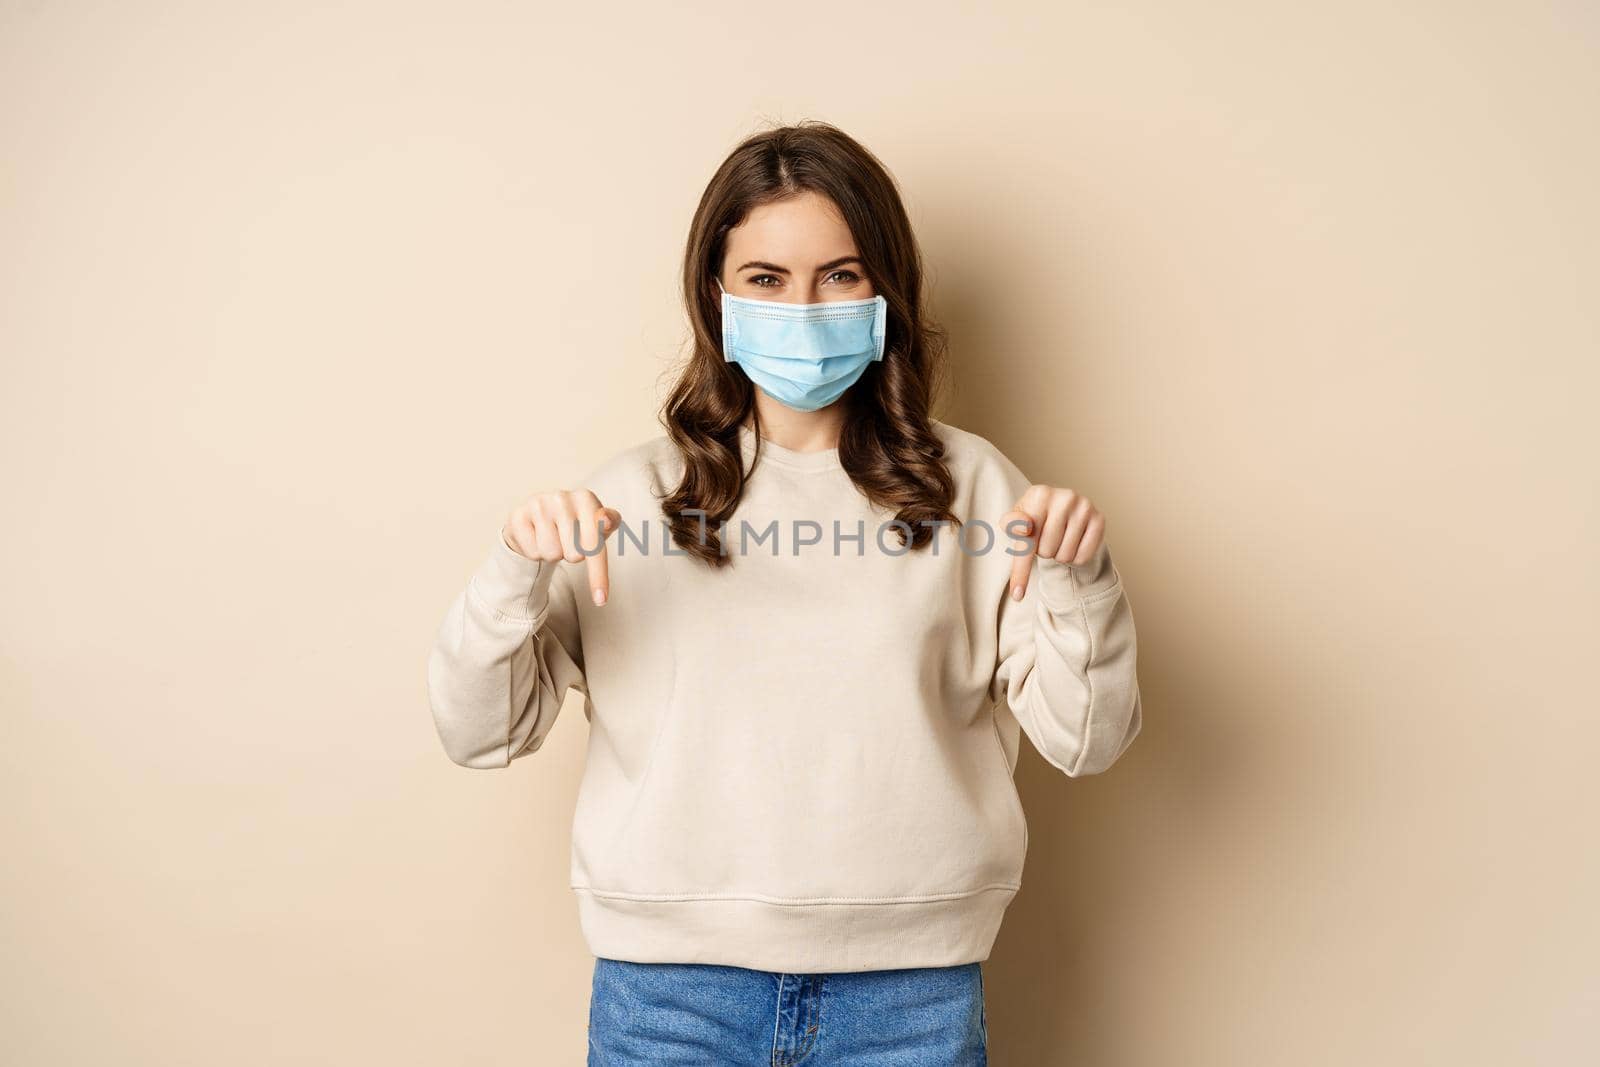 Cheerful cute woman in medical face mask, pointing fingers down, showing advertisement, using protection from covid-19, beige background.